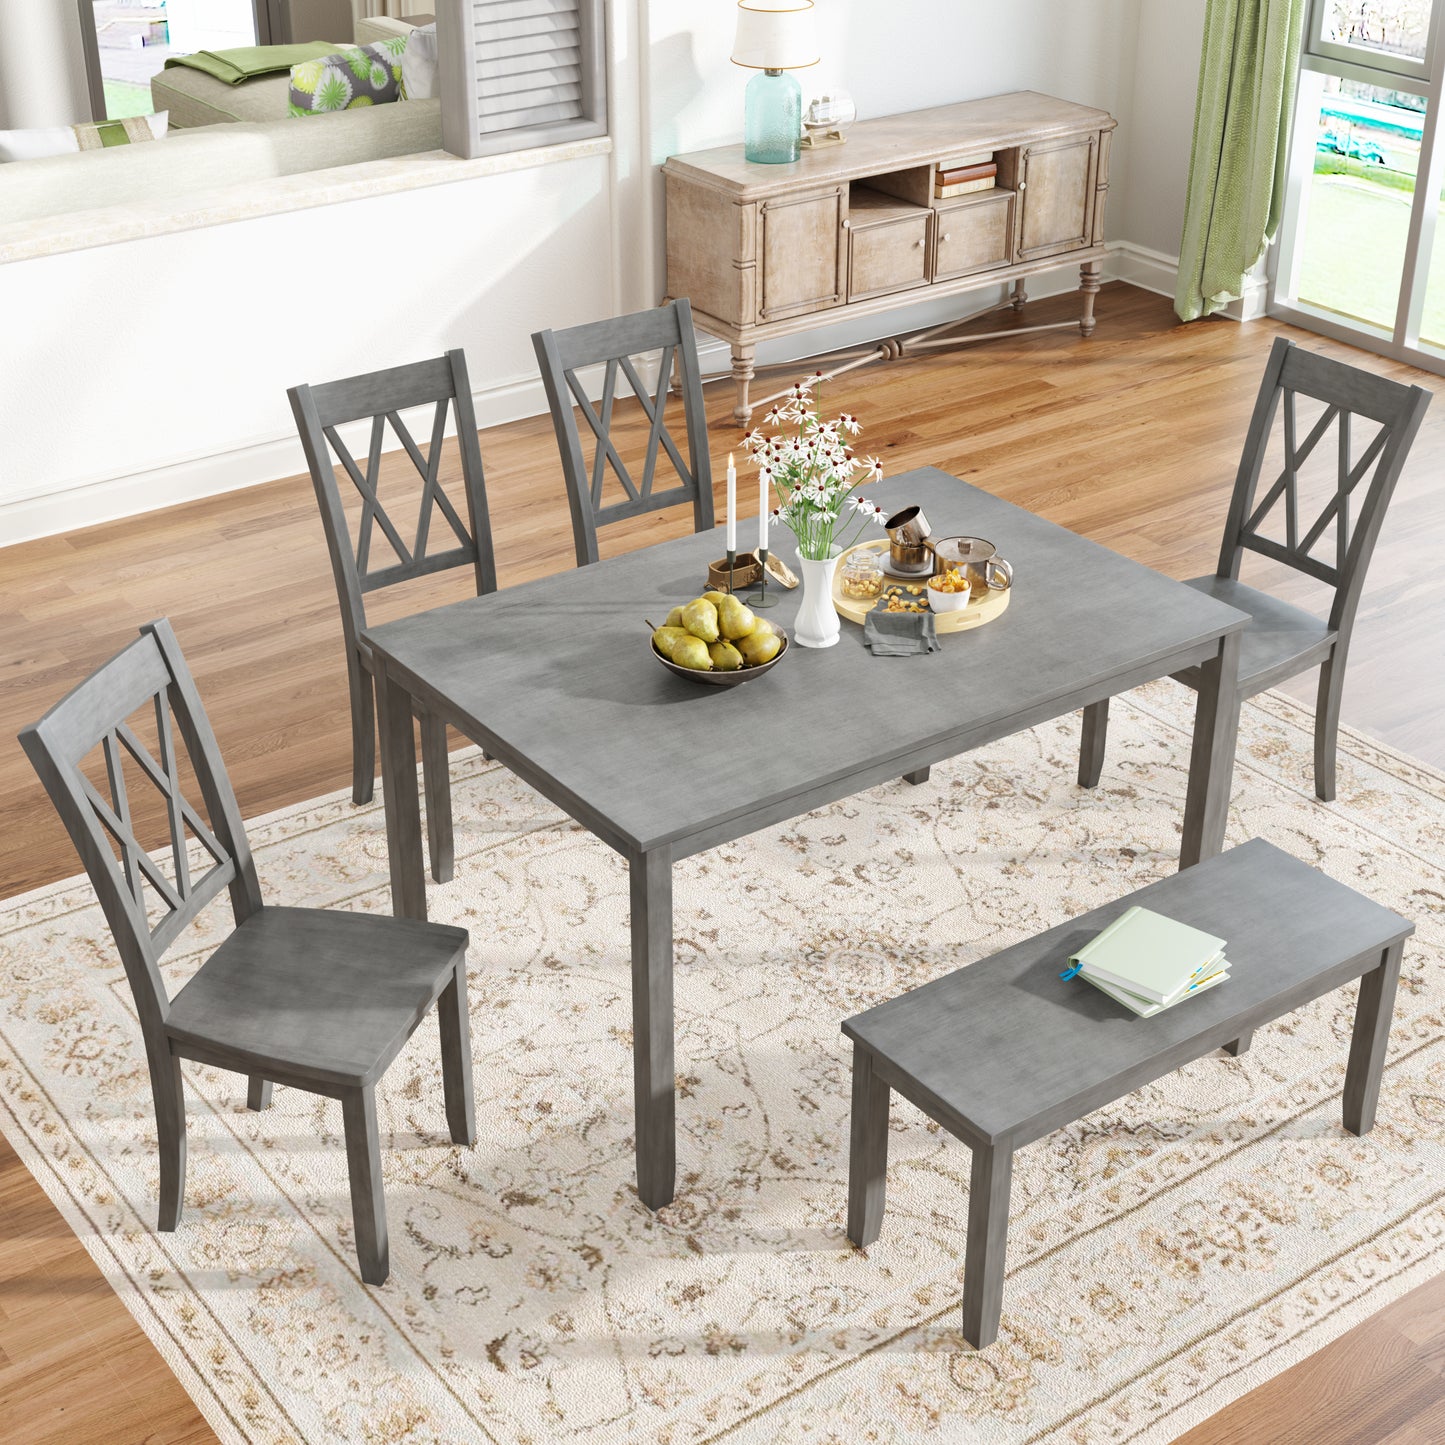 TOPMAX 6-piece Wooden Kitchen Table Set in Antique Gray